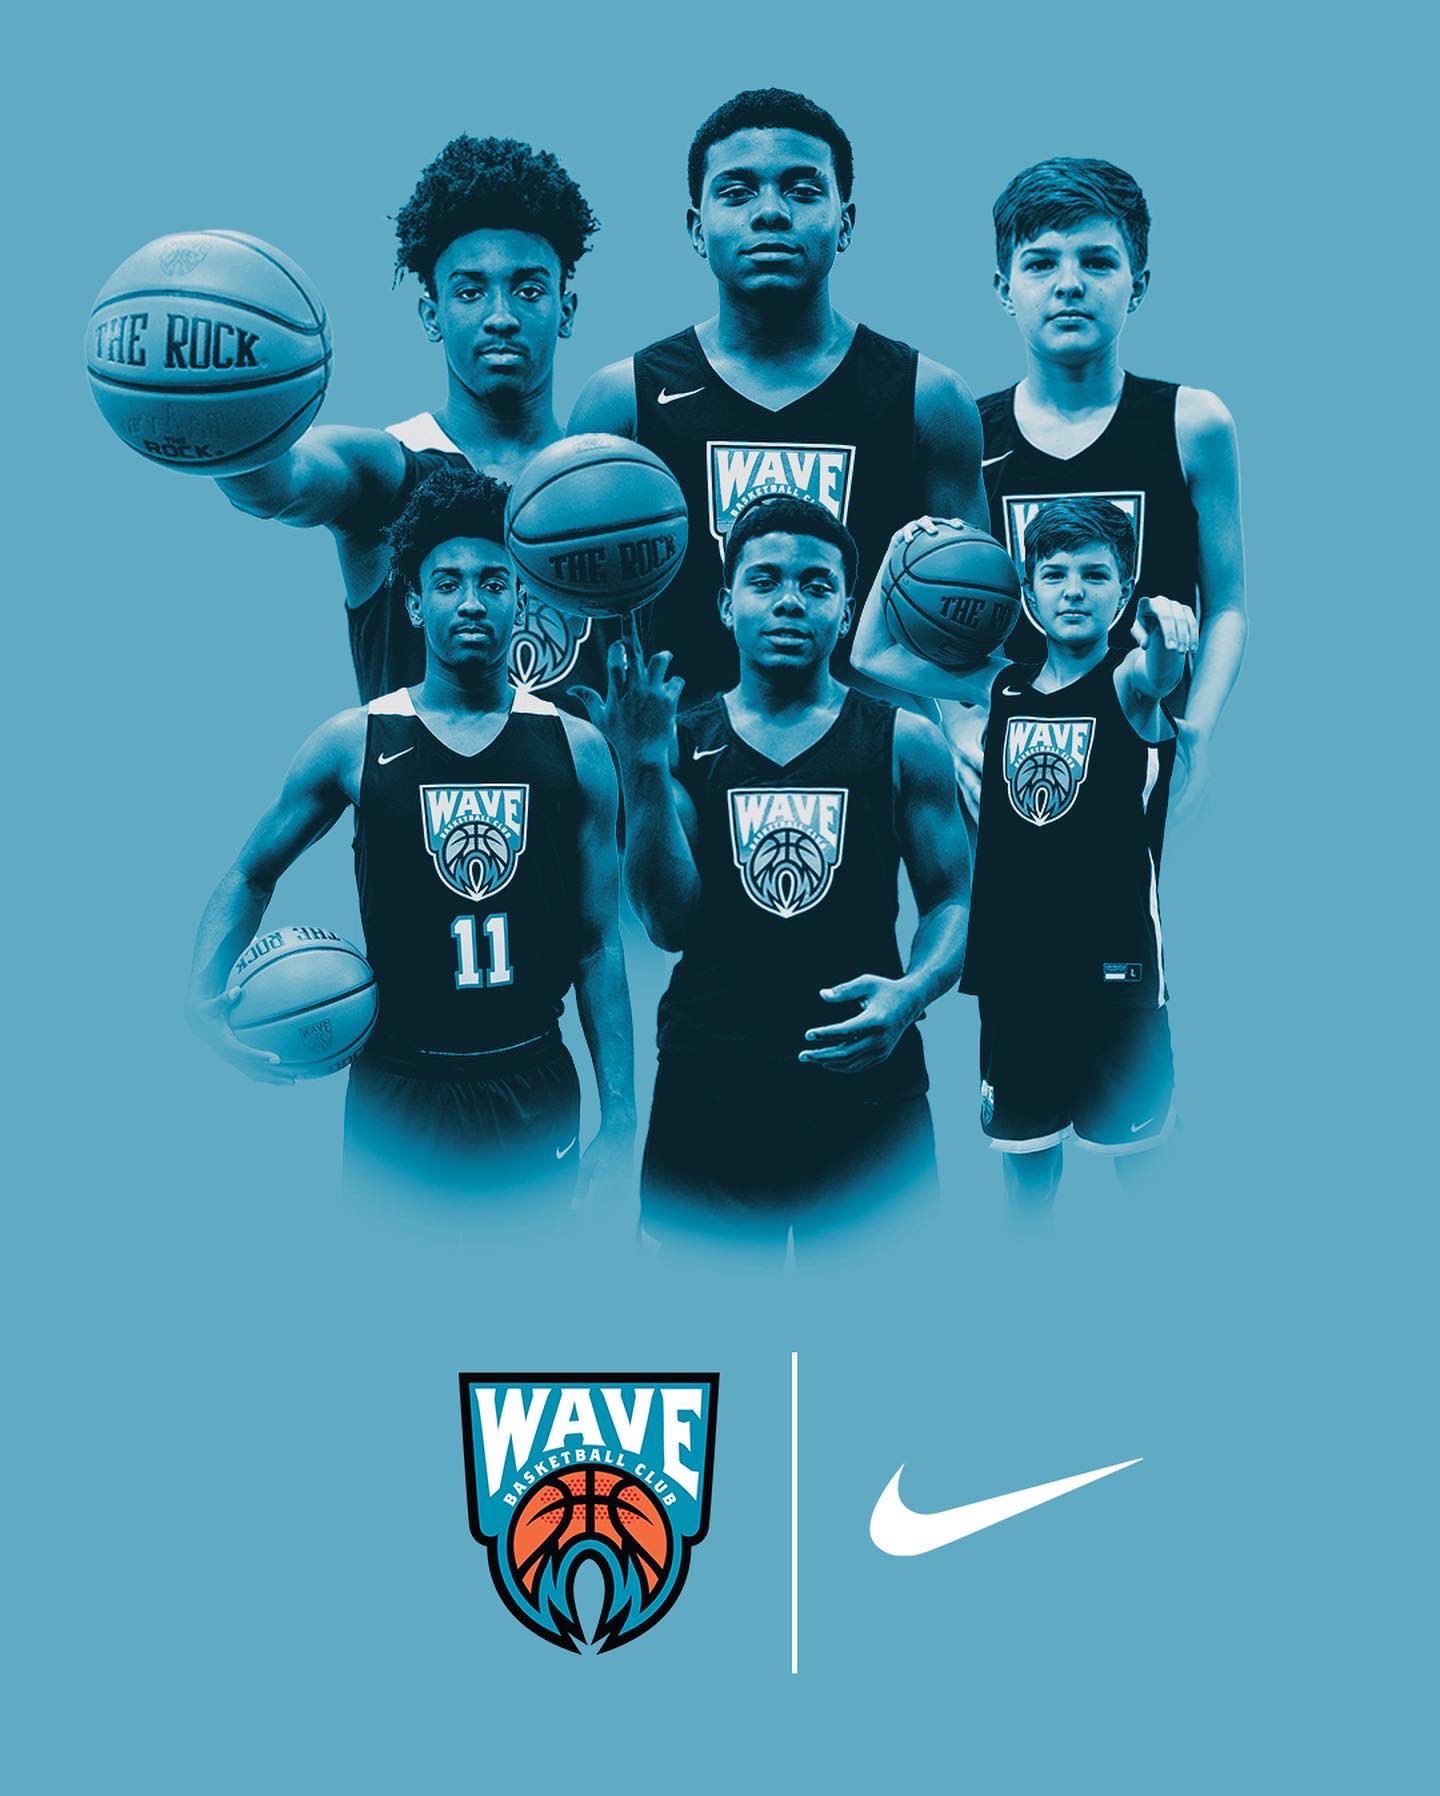 The Debut of New Jersey Waves Basketball